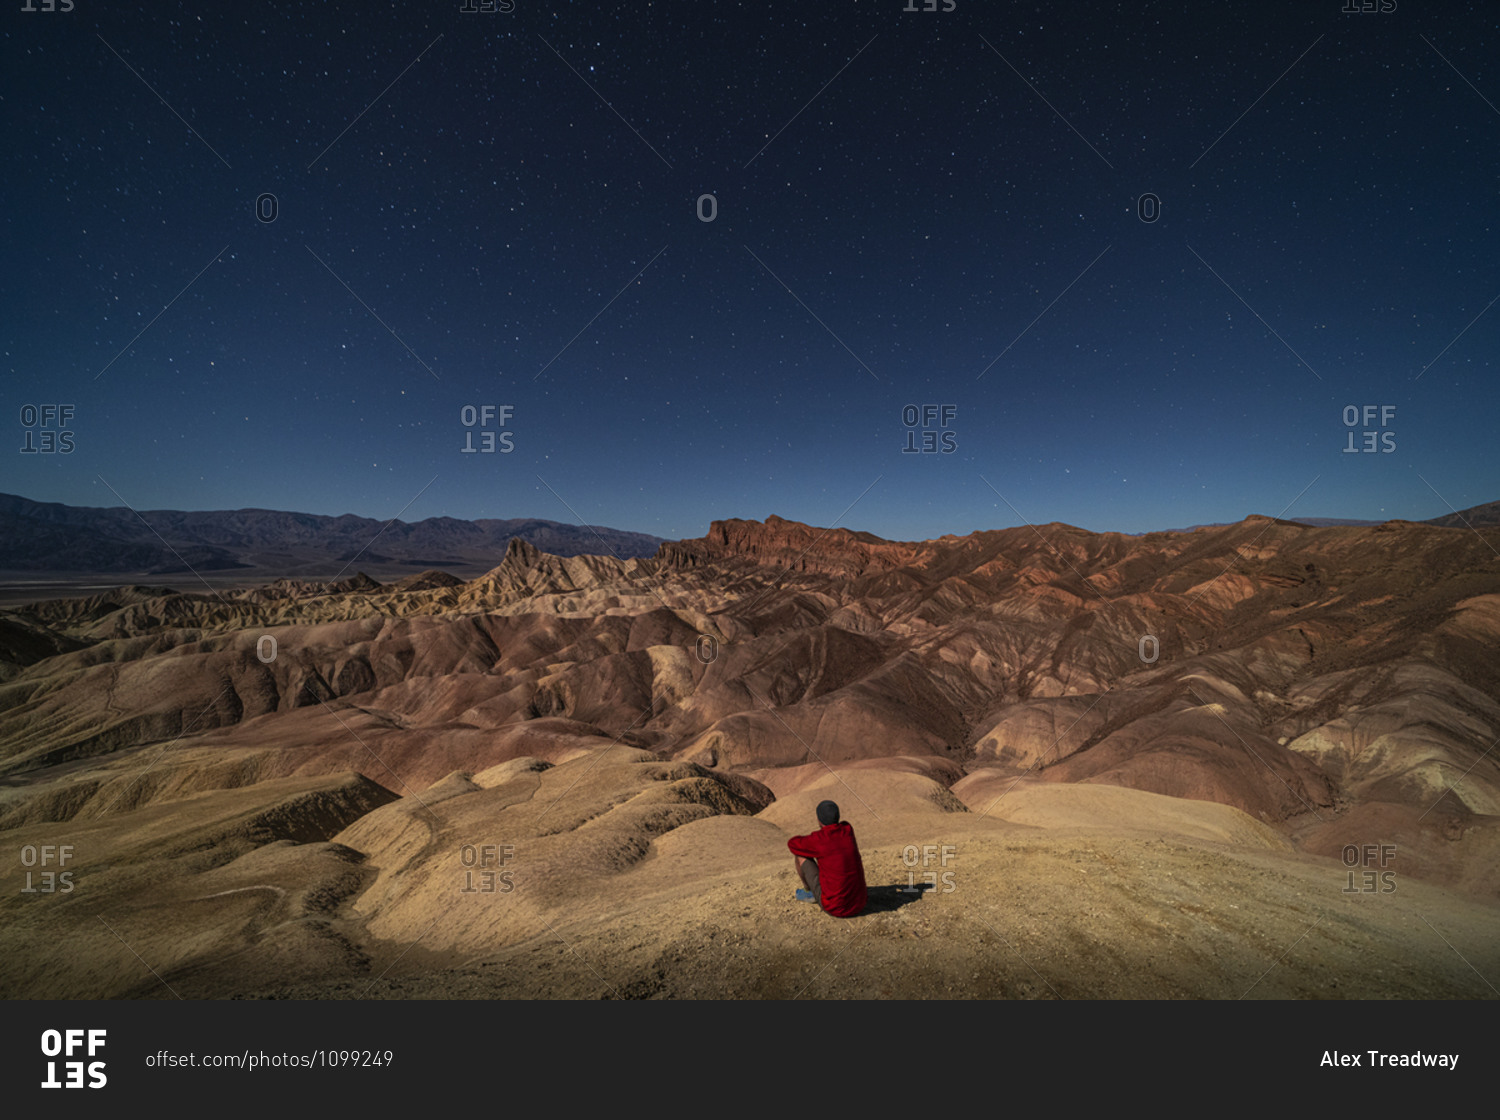 A man looking out at surreal rock formations caused by erosion at Zabriskie Point moonlit under a bright night sky full of stars